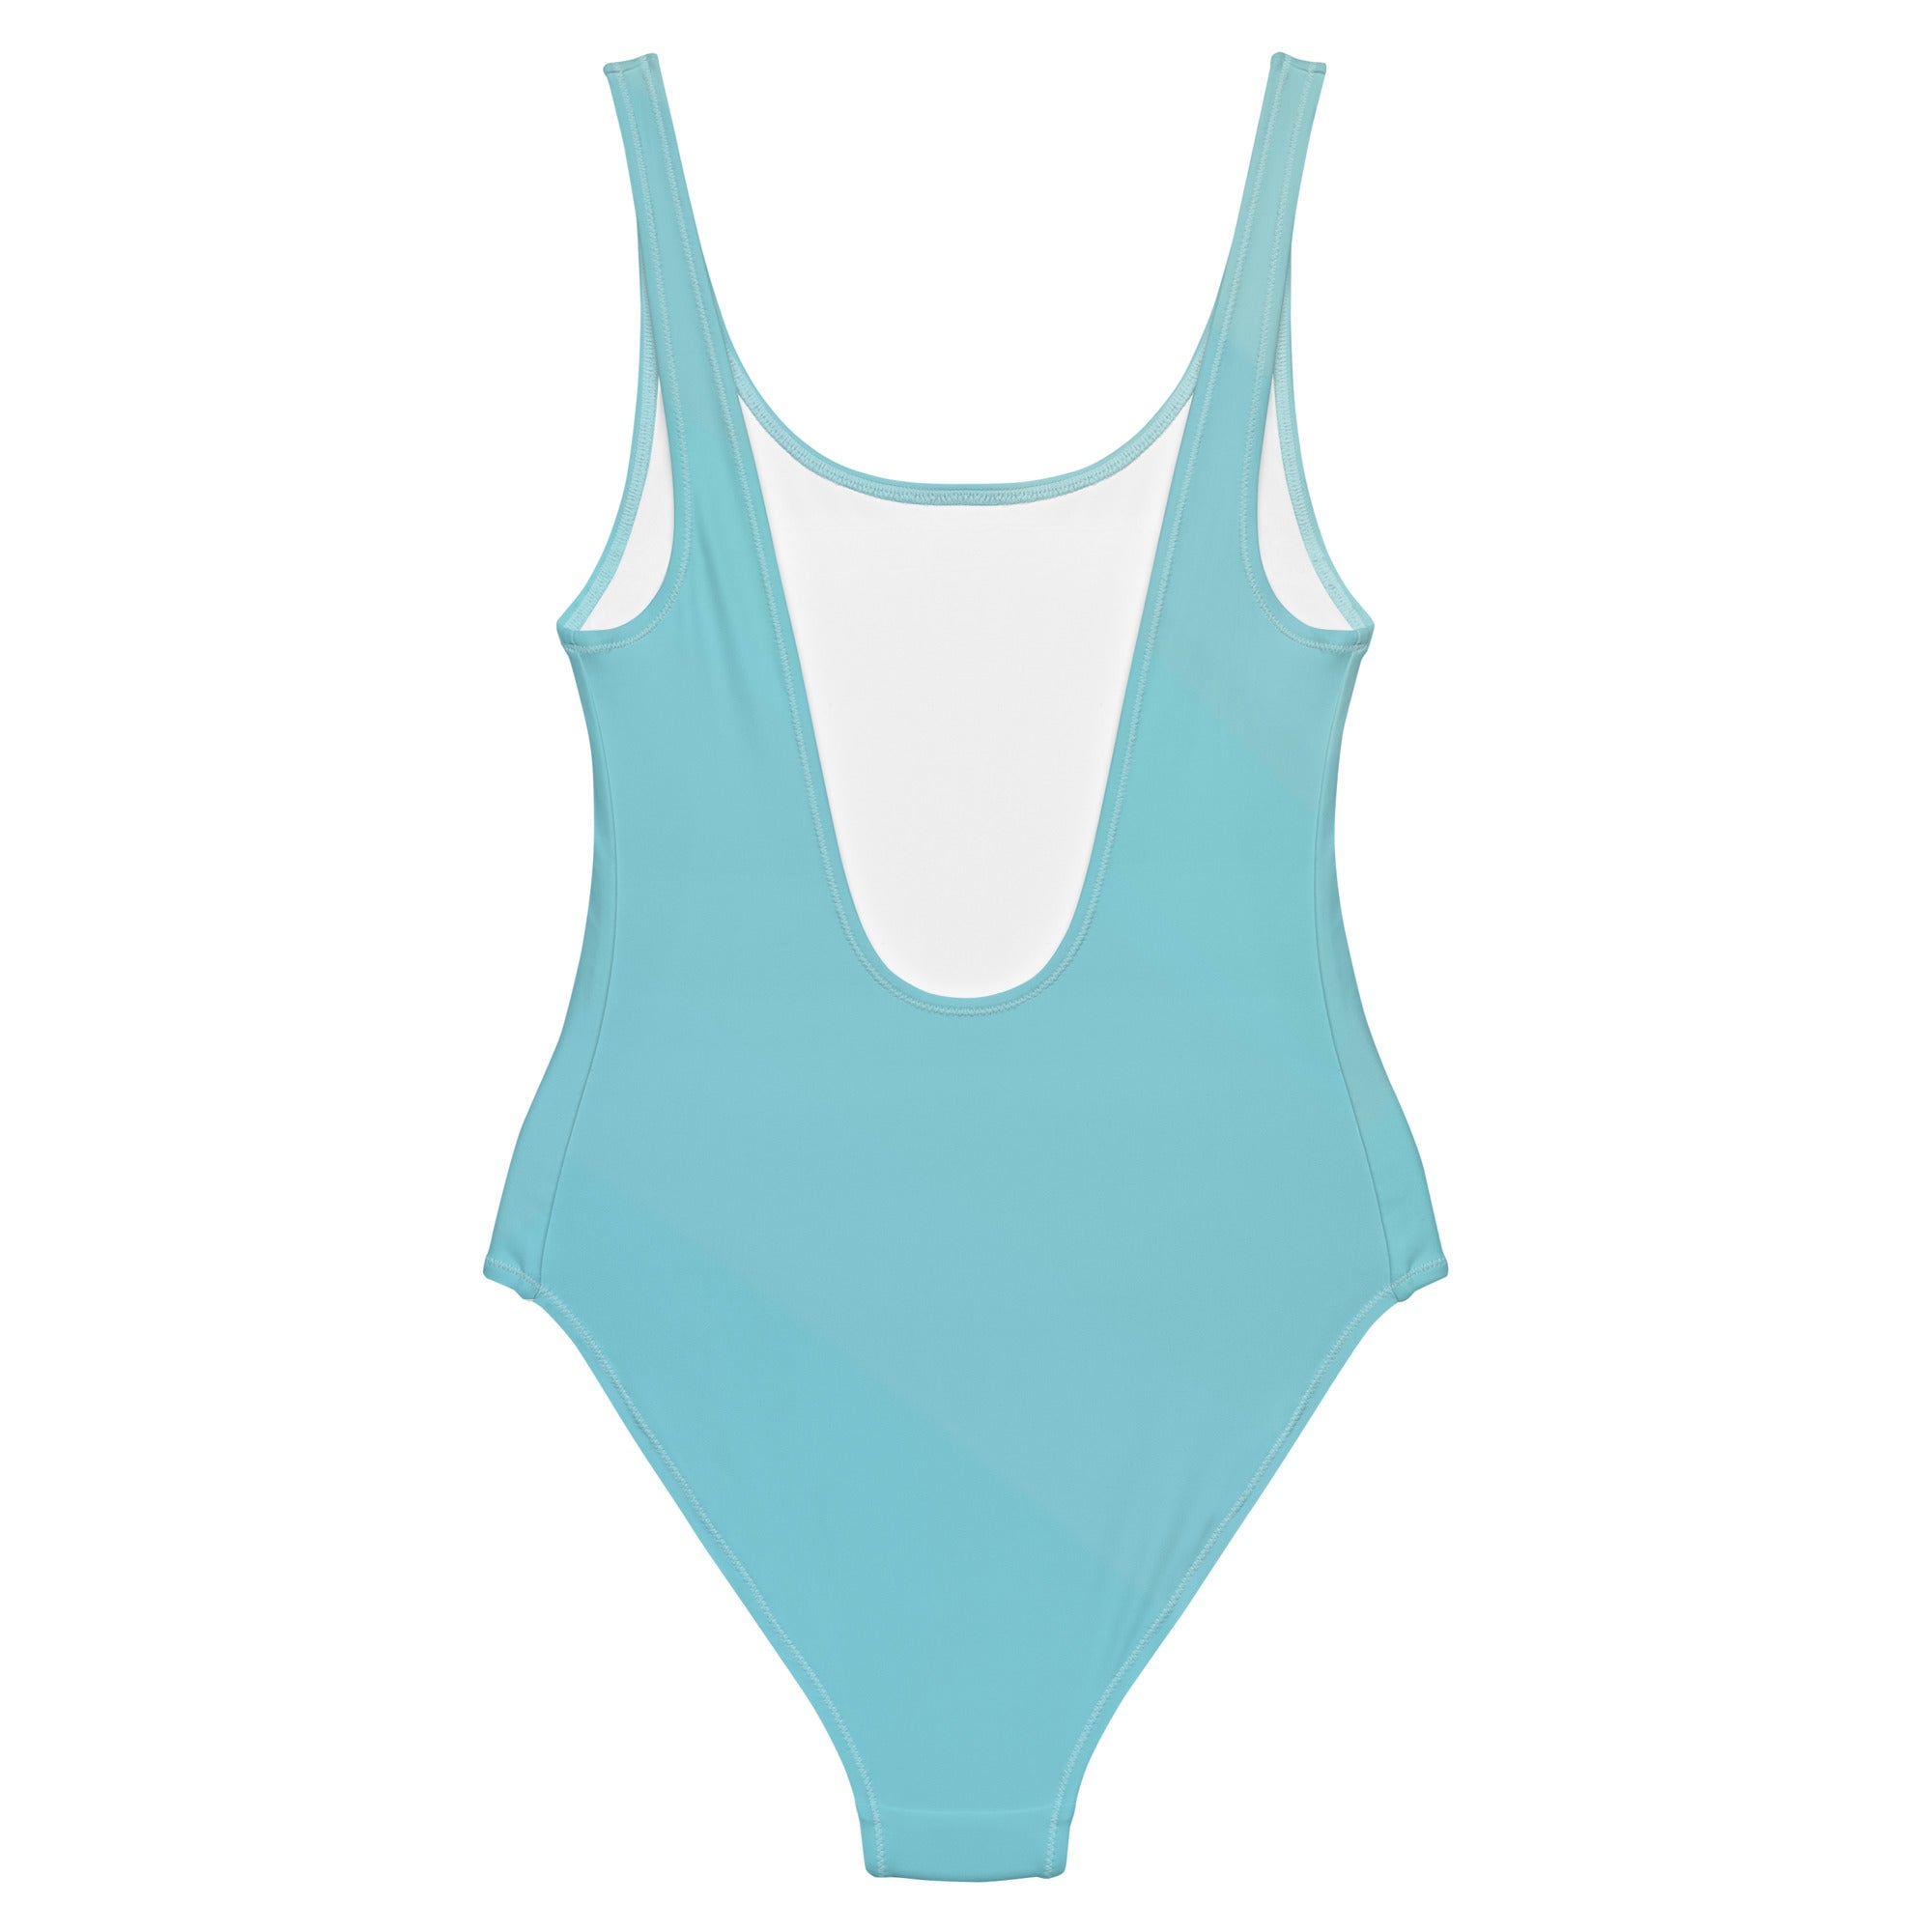 Solid color swimsuit for women’s clothing